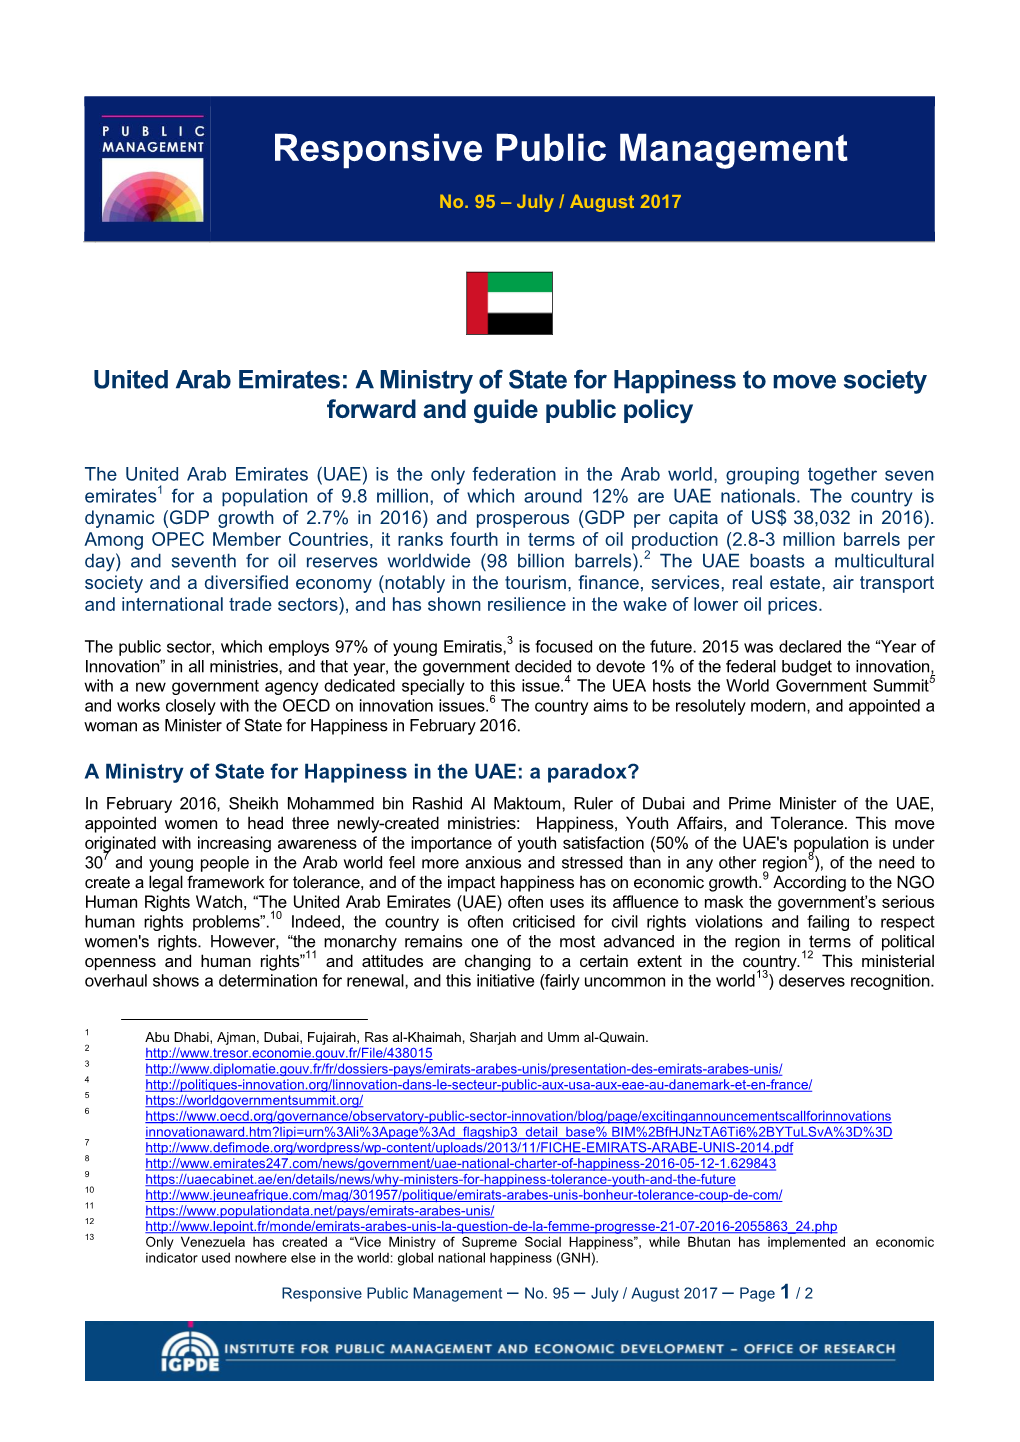 United Arab Emirates: a Ministry of State for Happiness to Move Society Forward and Guide Public Policy